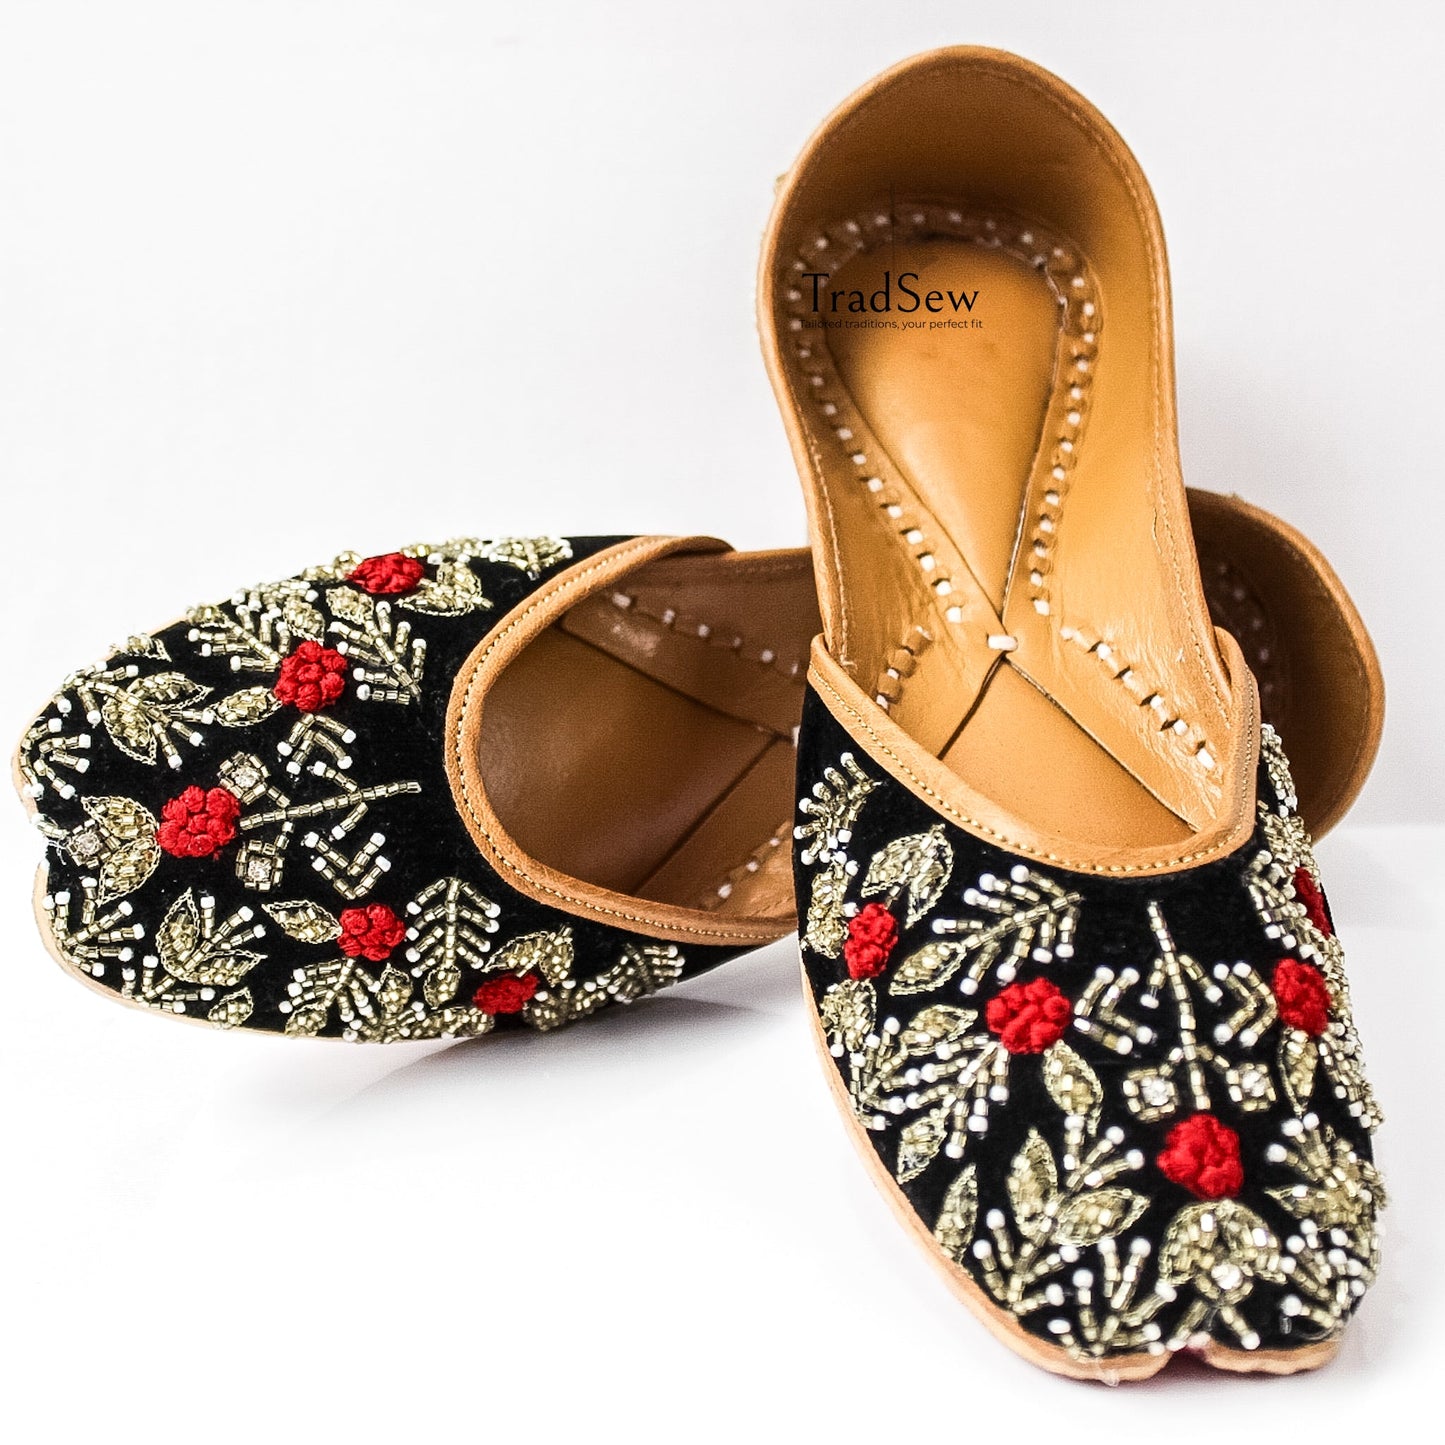 Black jutti with red and white flower stonework design by Tradsew